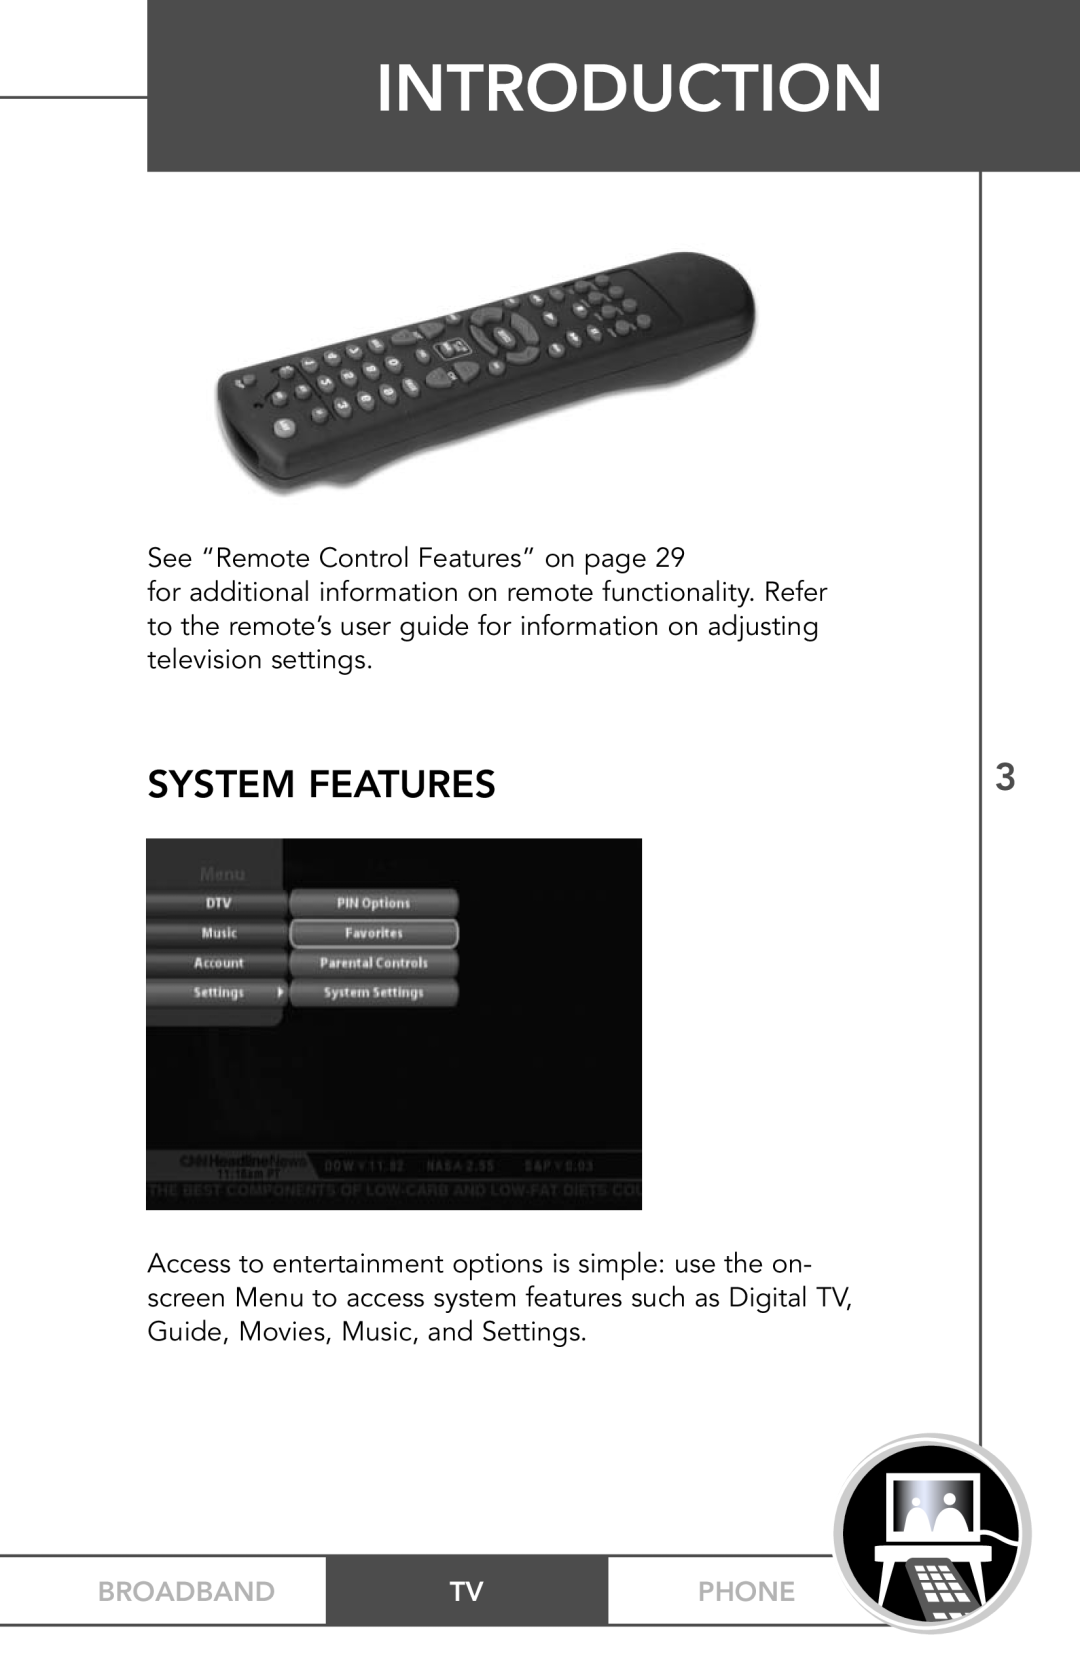 TV Guide On Screen PHONEBROADBAND TV manual Introduction, System Features, Broadband, Phone 